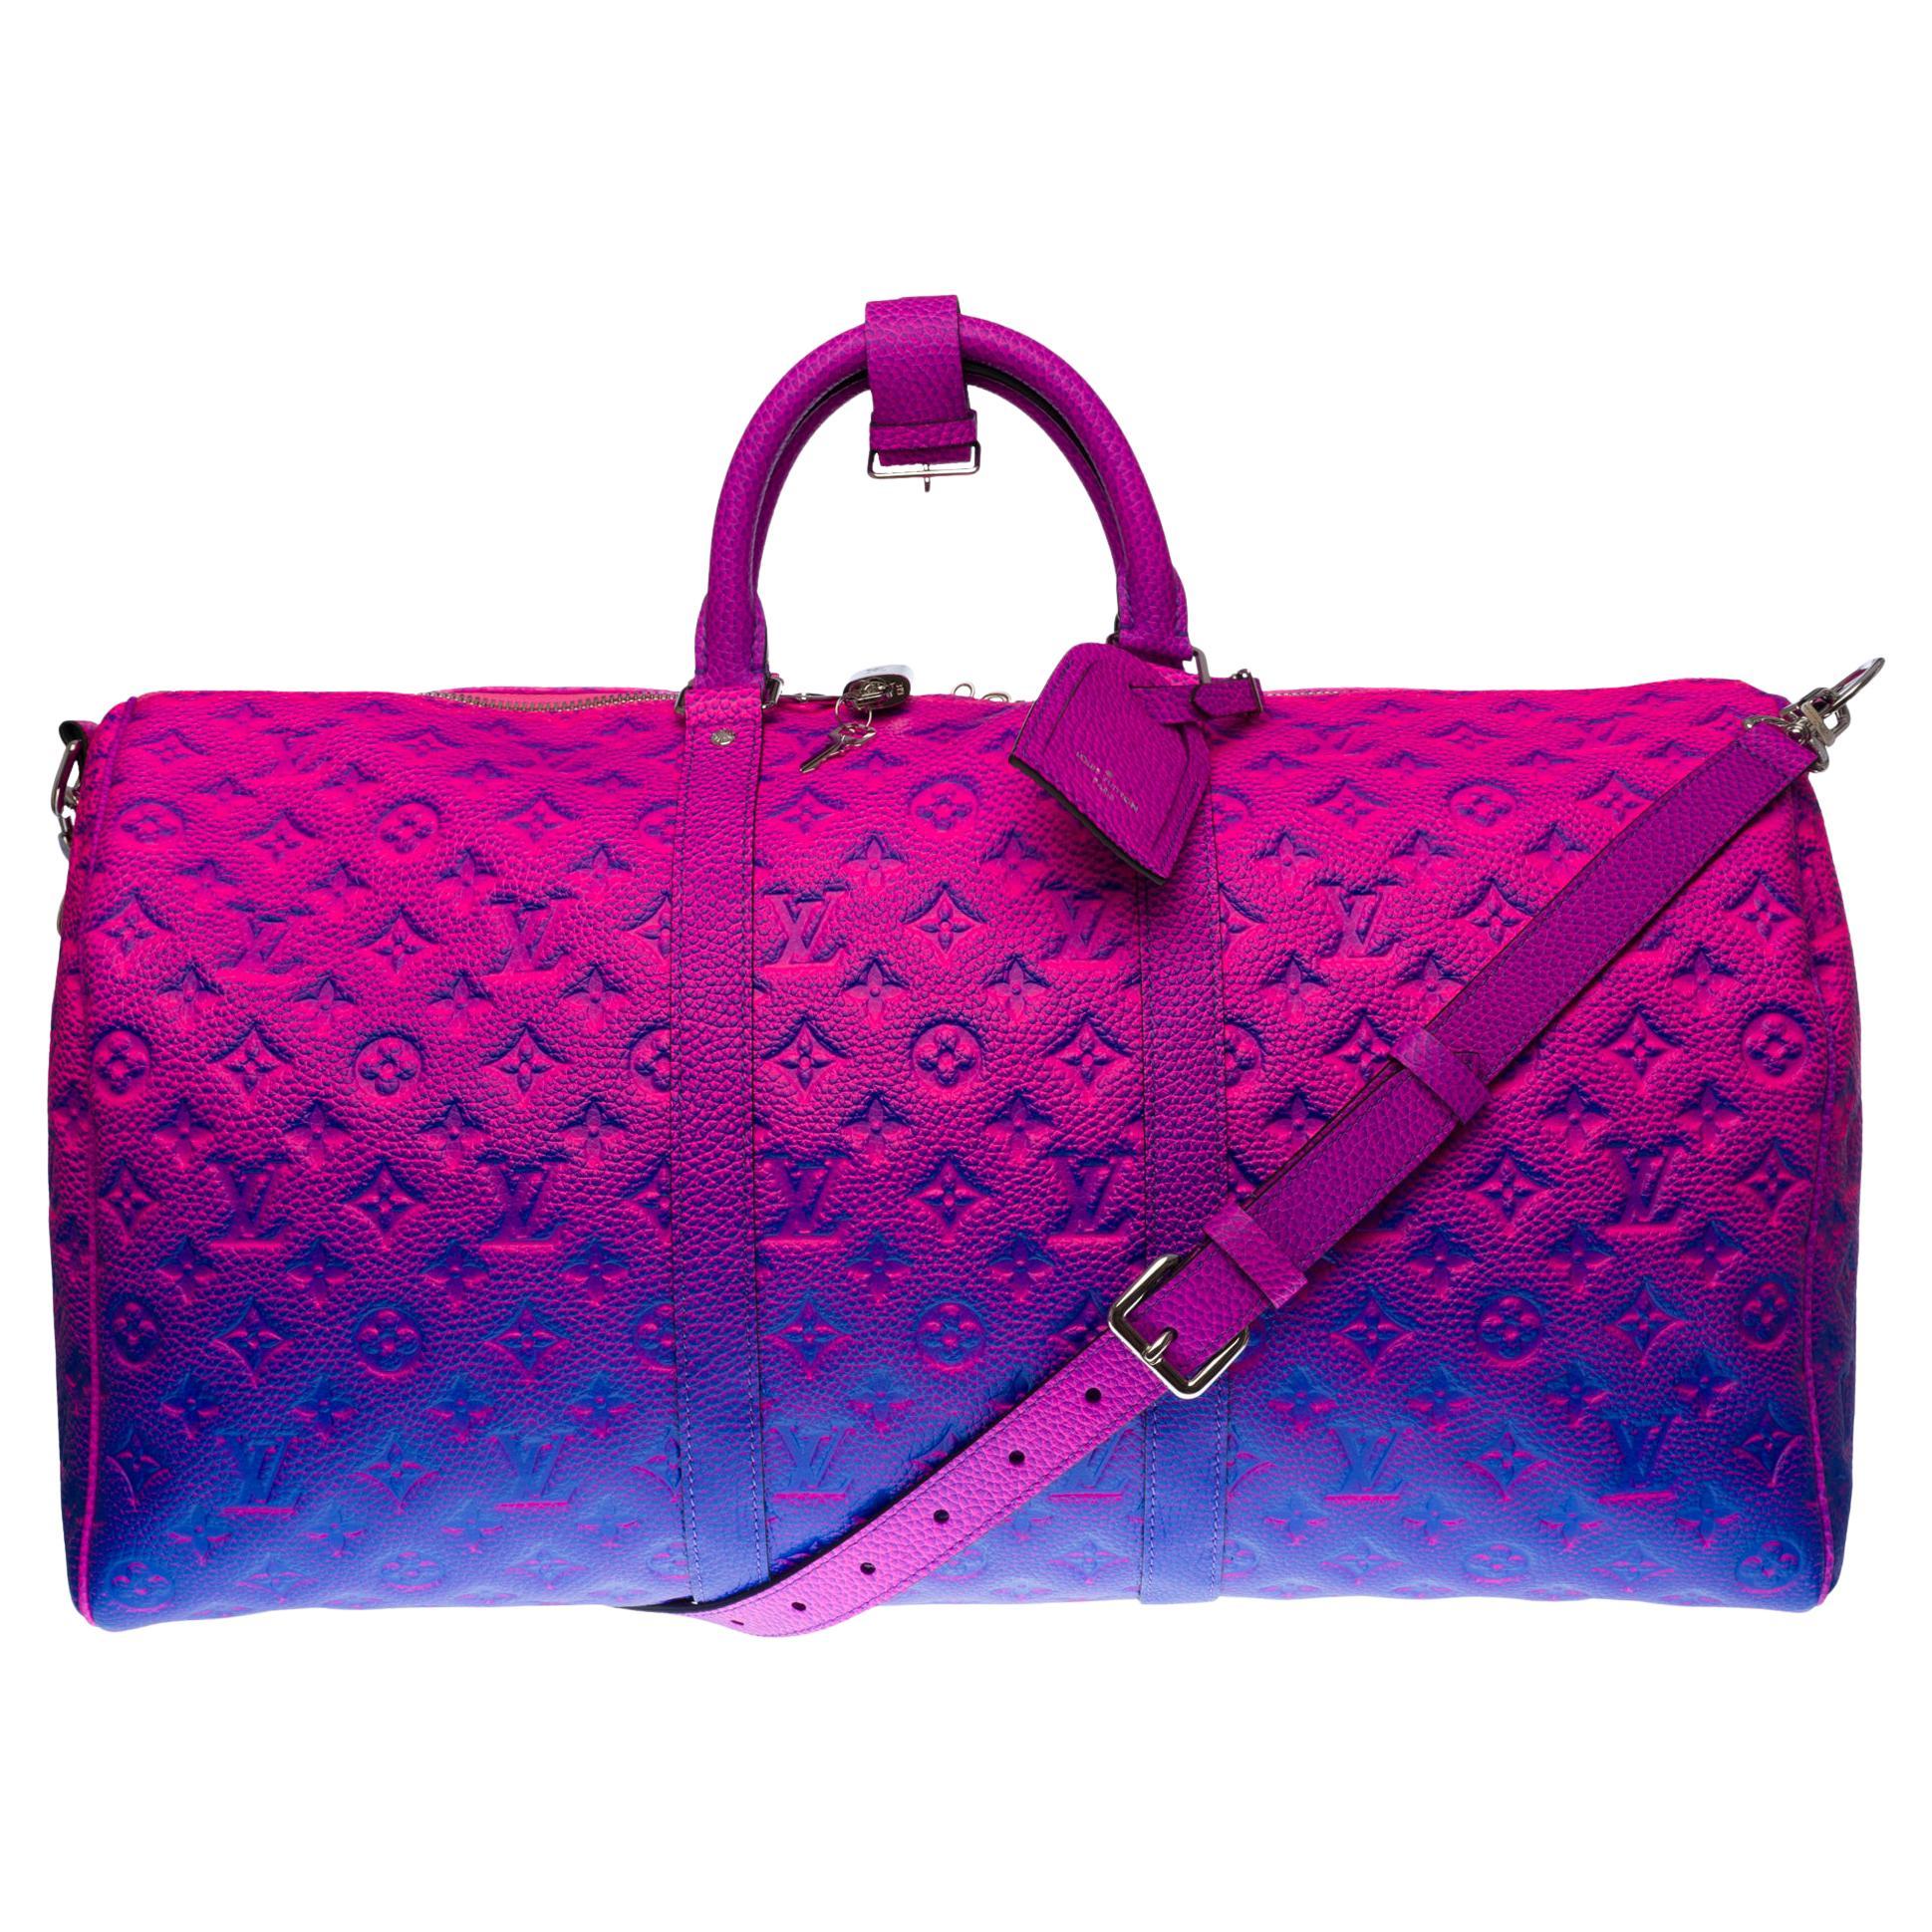 NEW-Louis Vuitton keepall 50 strap Travel bag Spray in Pink/Blue / Virgil Abloh